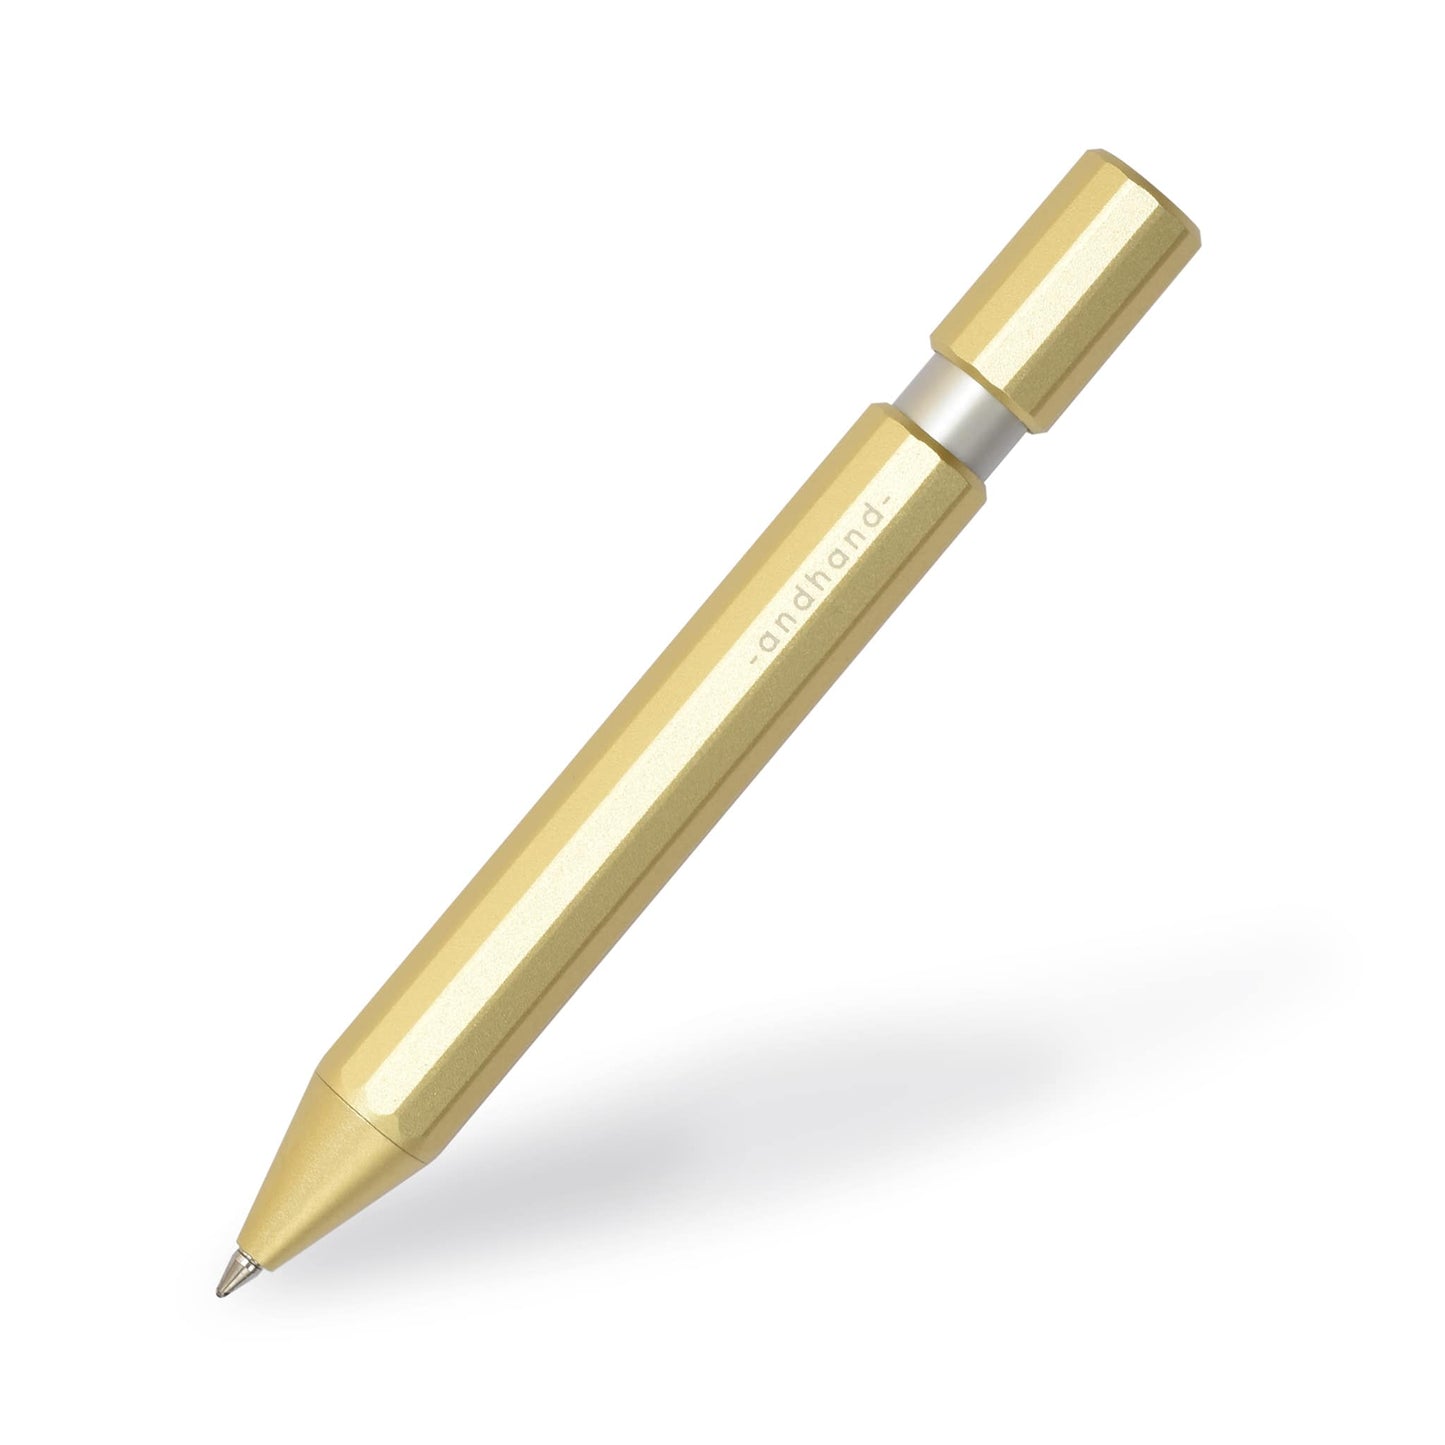 Aspect retractable pen in gold lustre anodized finish. A great pen for journaling, sketching or note taking. Equipped with a capless system rollerball cartridge for great ink flow.